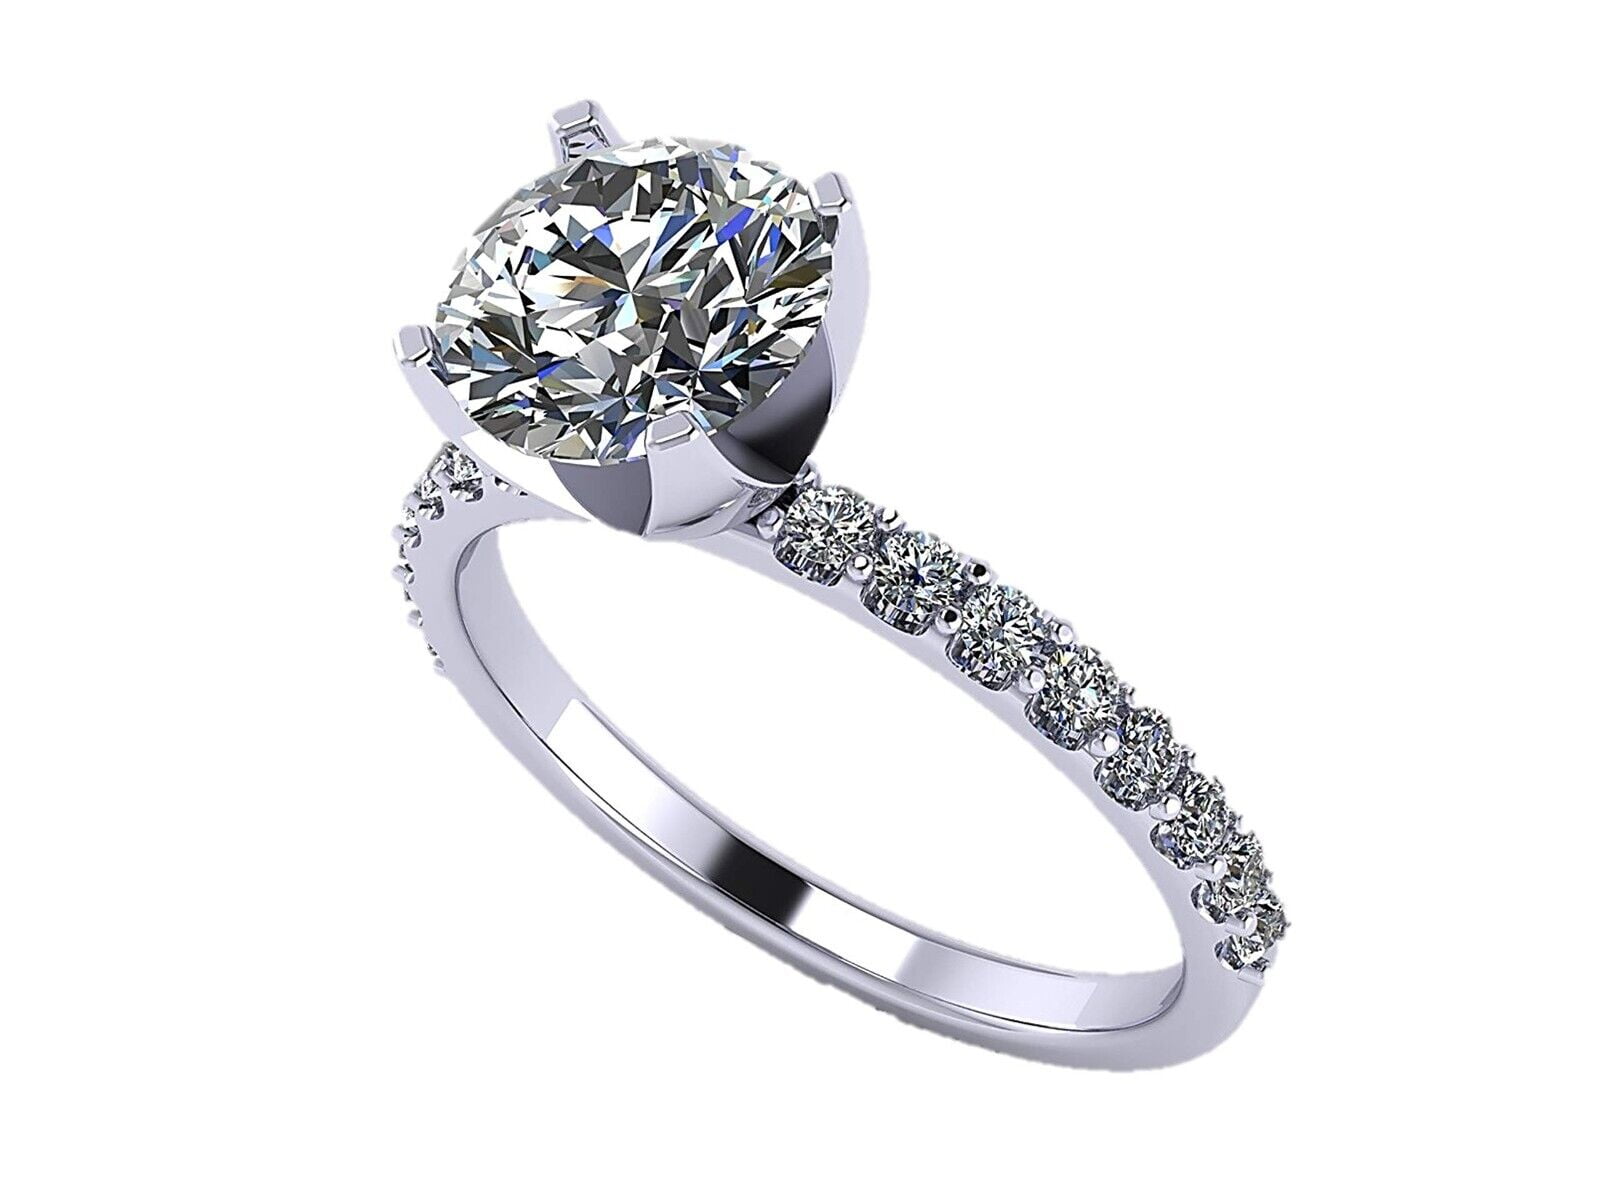 Round Cut Zirconia Solitaire W/ Side CZs Engagement Ring 8.0mm (2.00ct)  10K White Gold Size 9.5